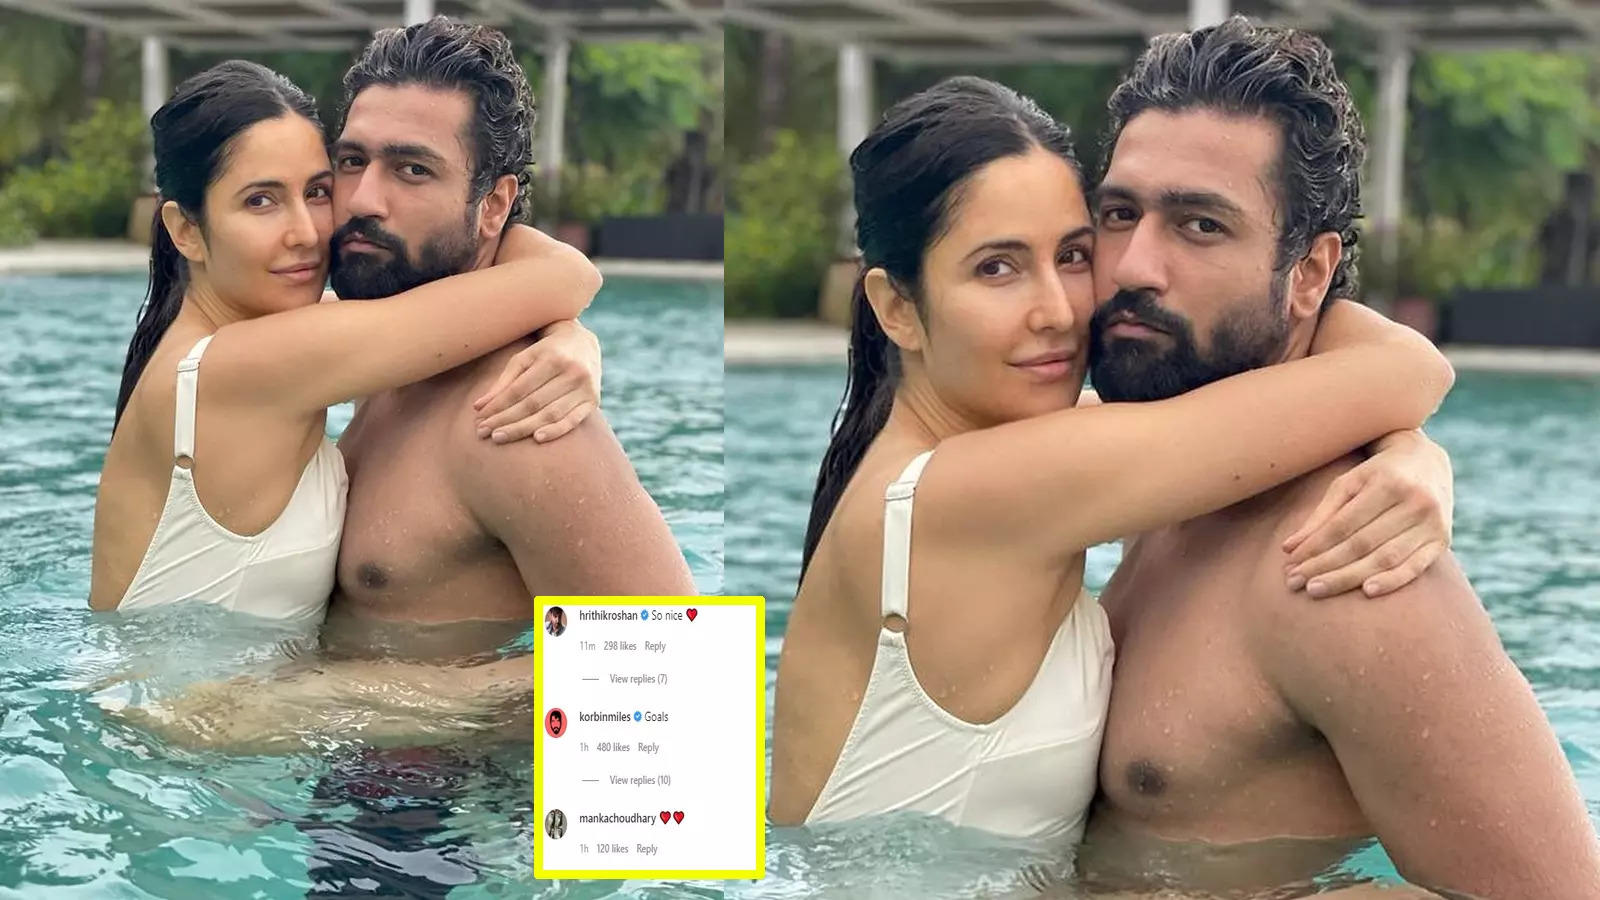 Katrina Kaif plays the possessive wife in steamy new pool pic with Vicky Kaushal Hindi Movie News